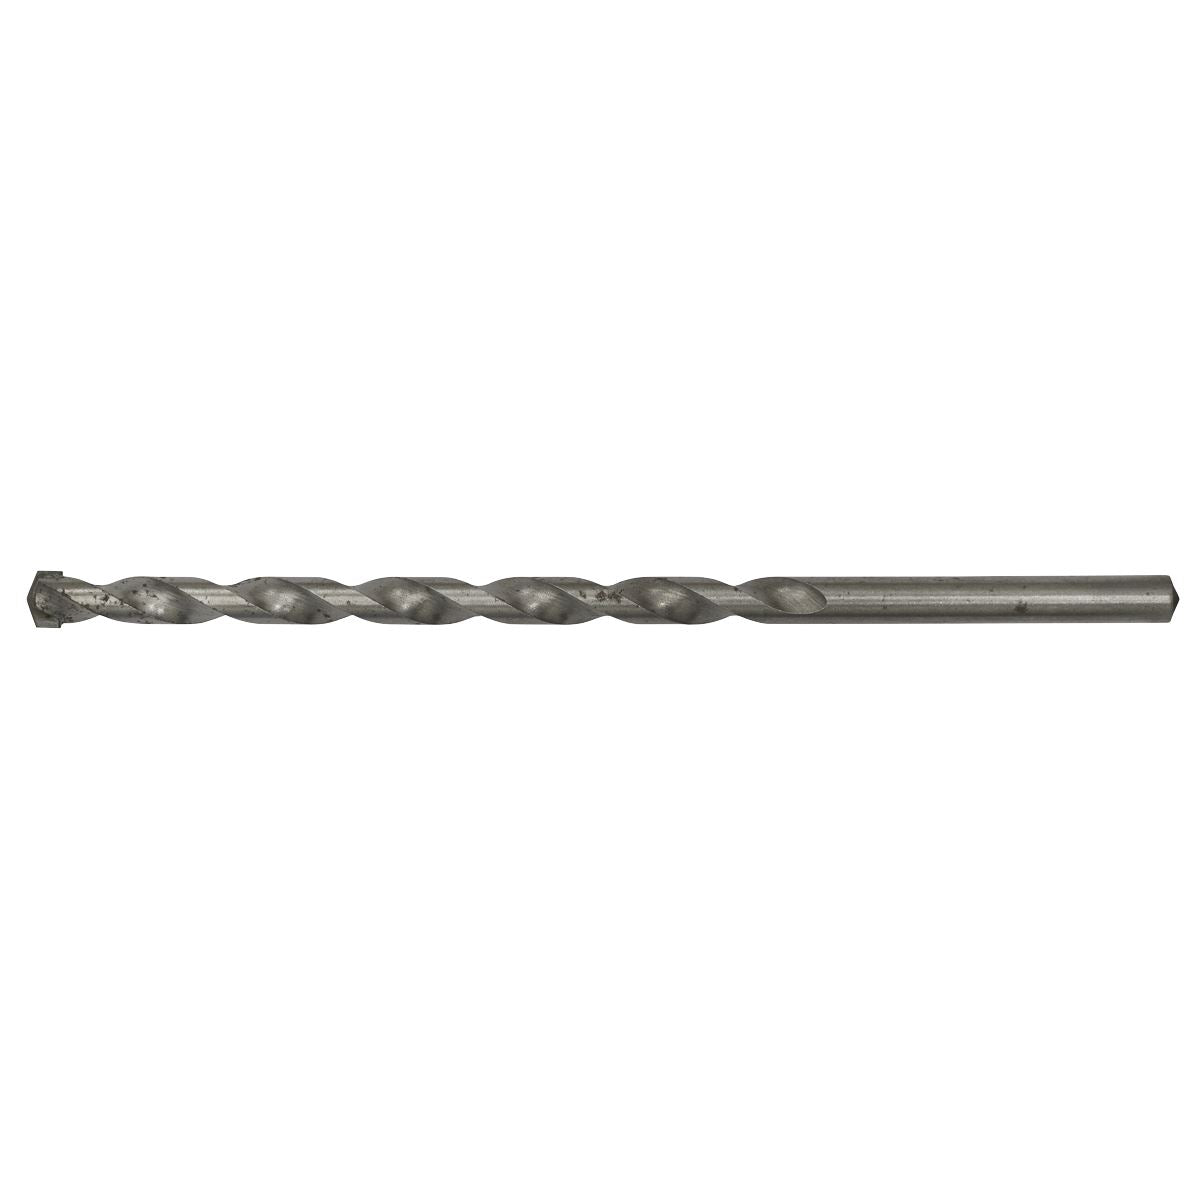 Worksafe by Sealey Straight Shank Rotary Impact Drill Bit Ø10 x 200mm